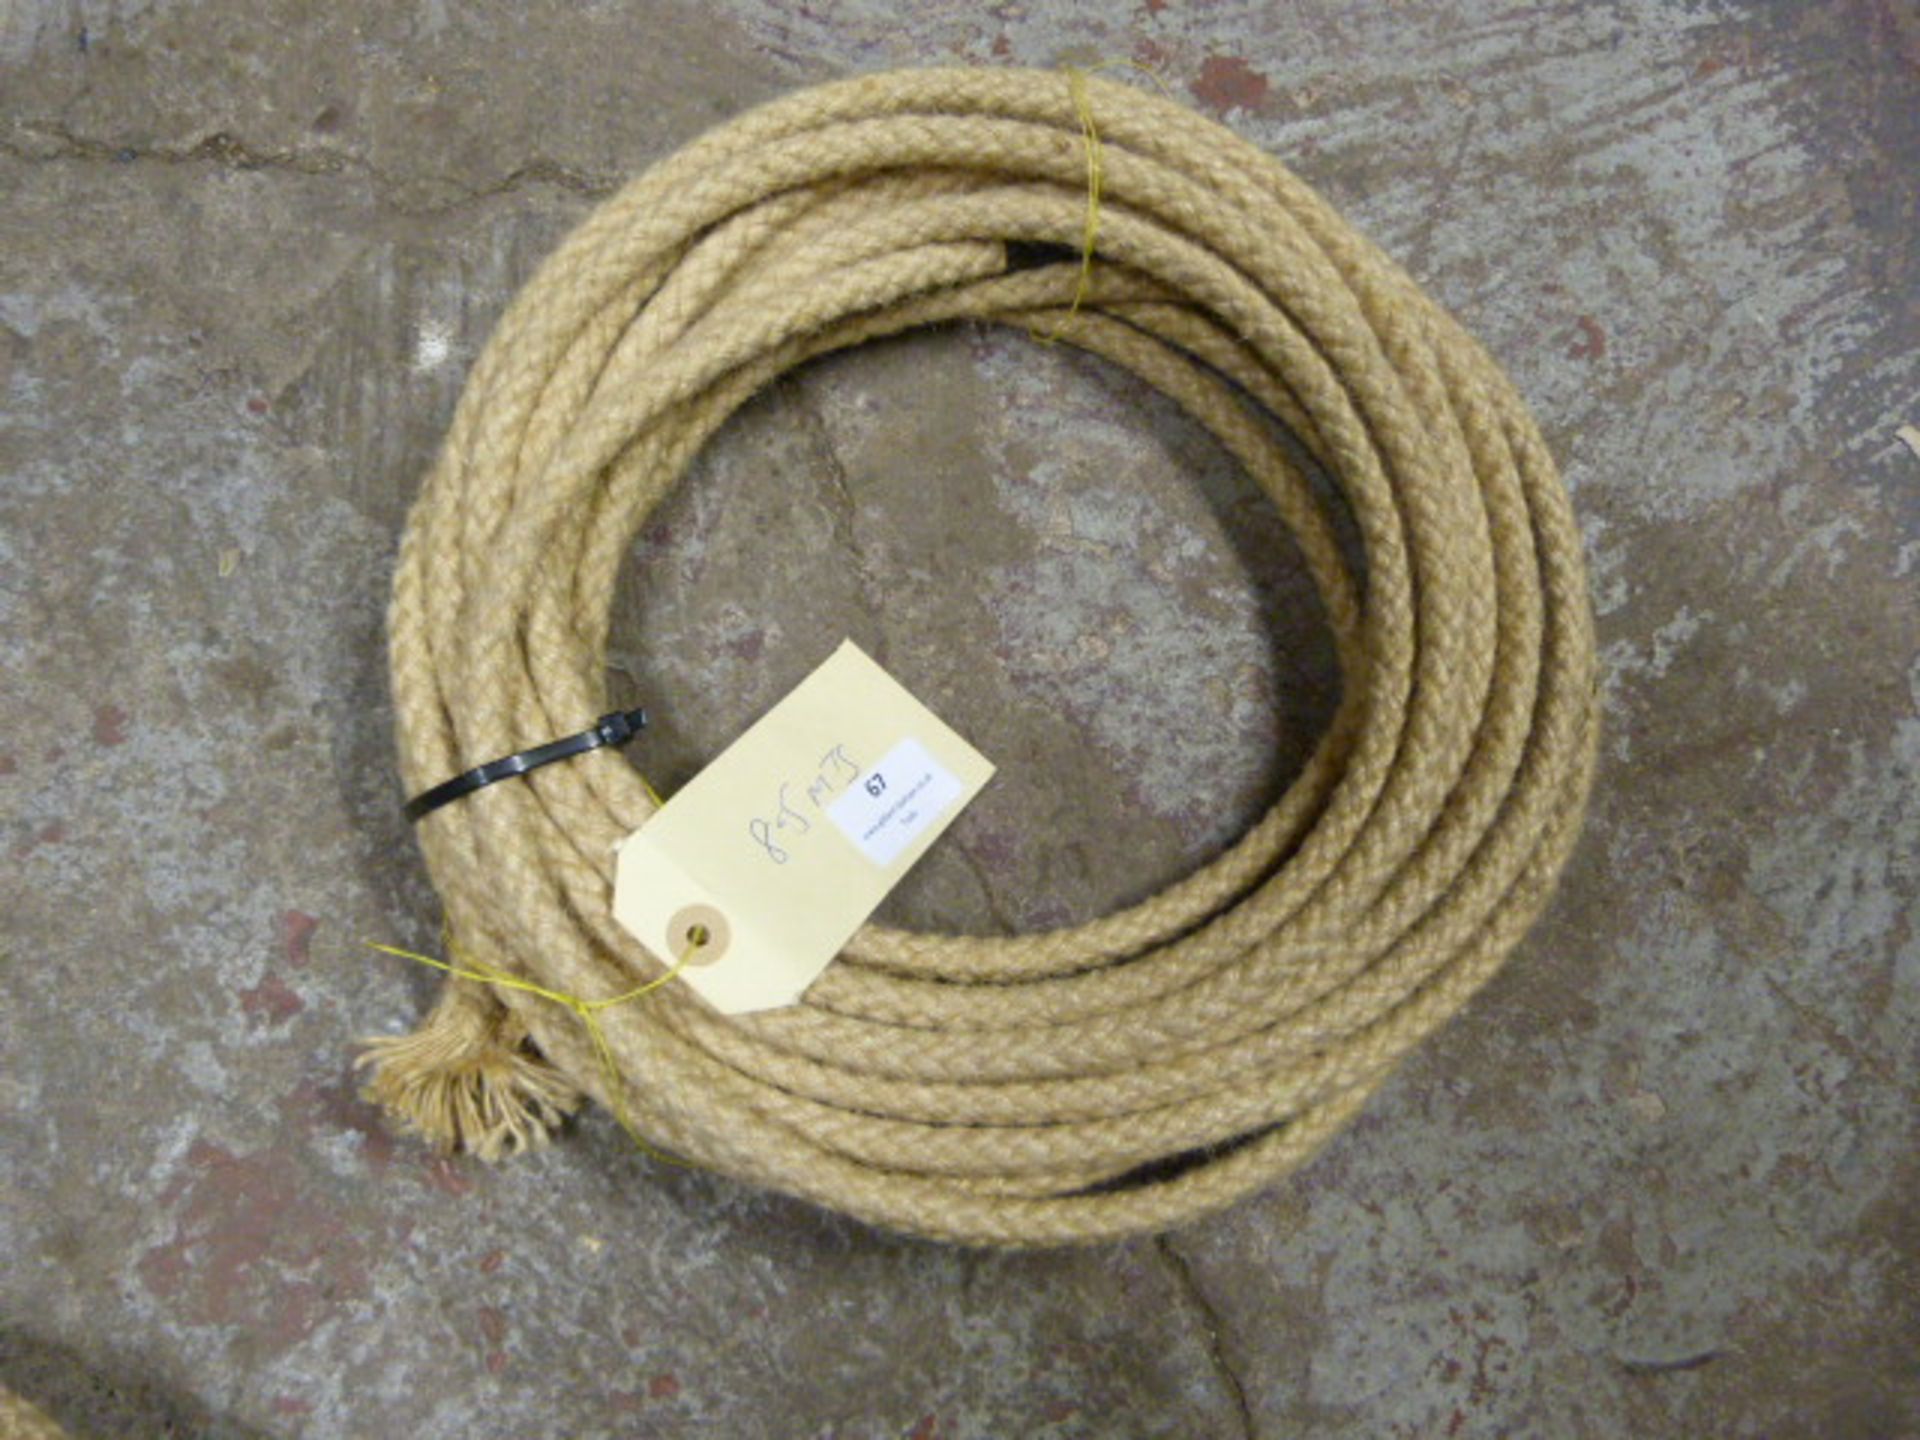 8.5m Length of Wire Covered with Rope